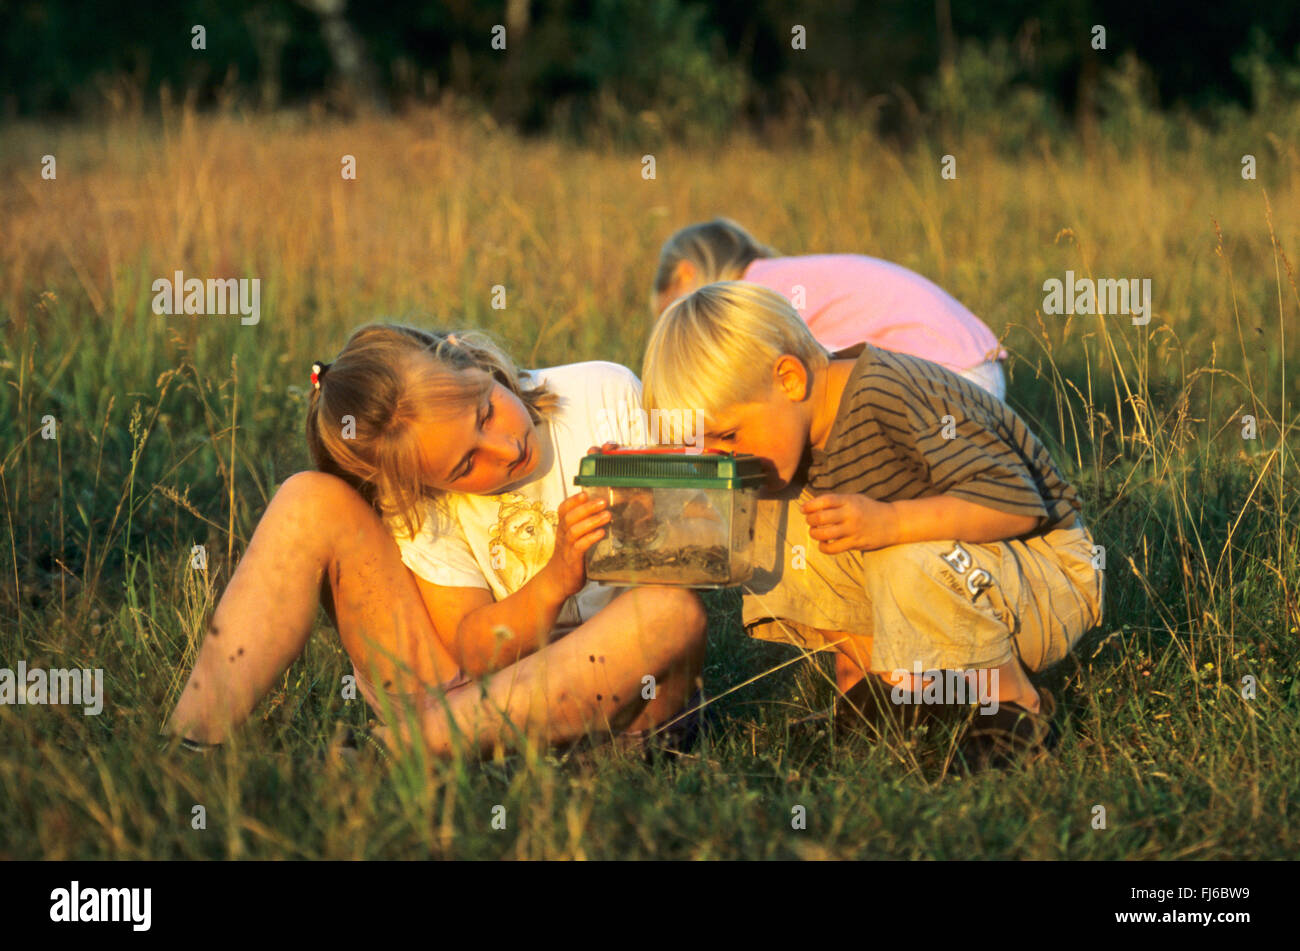 children watching caught grasshoppers, Germany Stock Photo